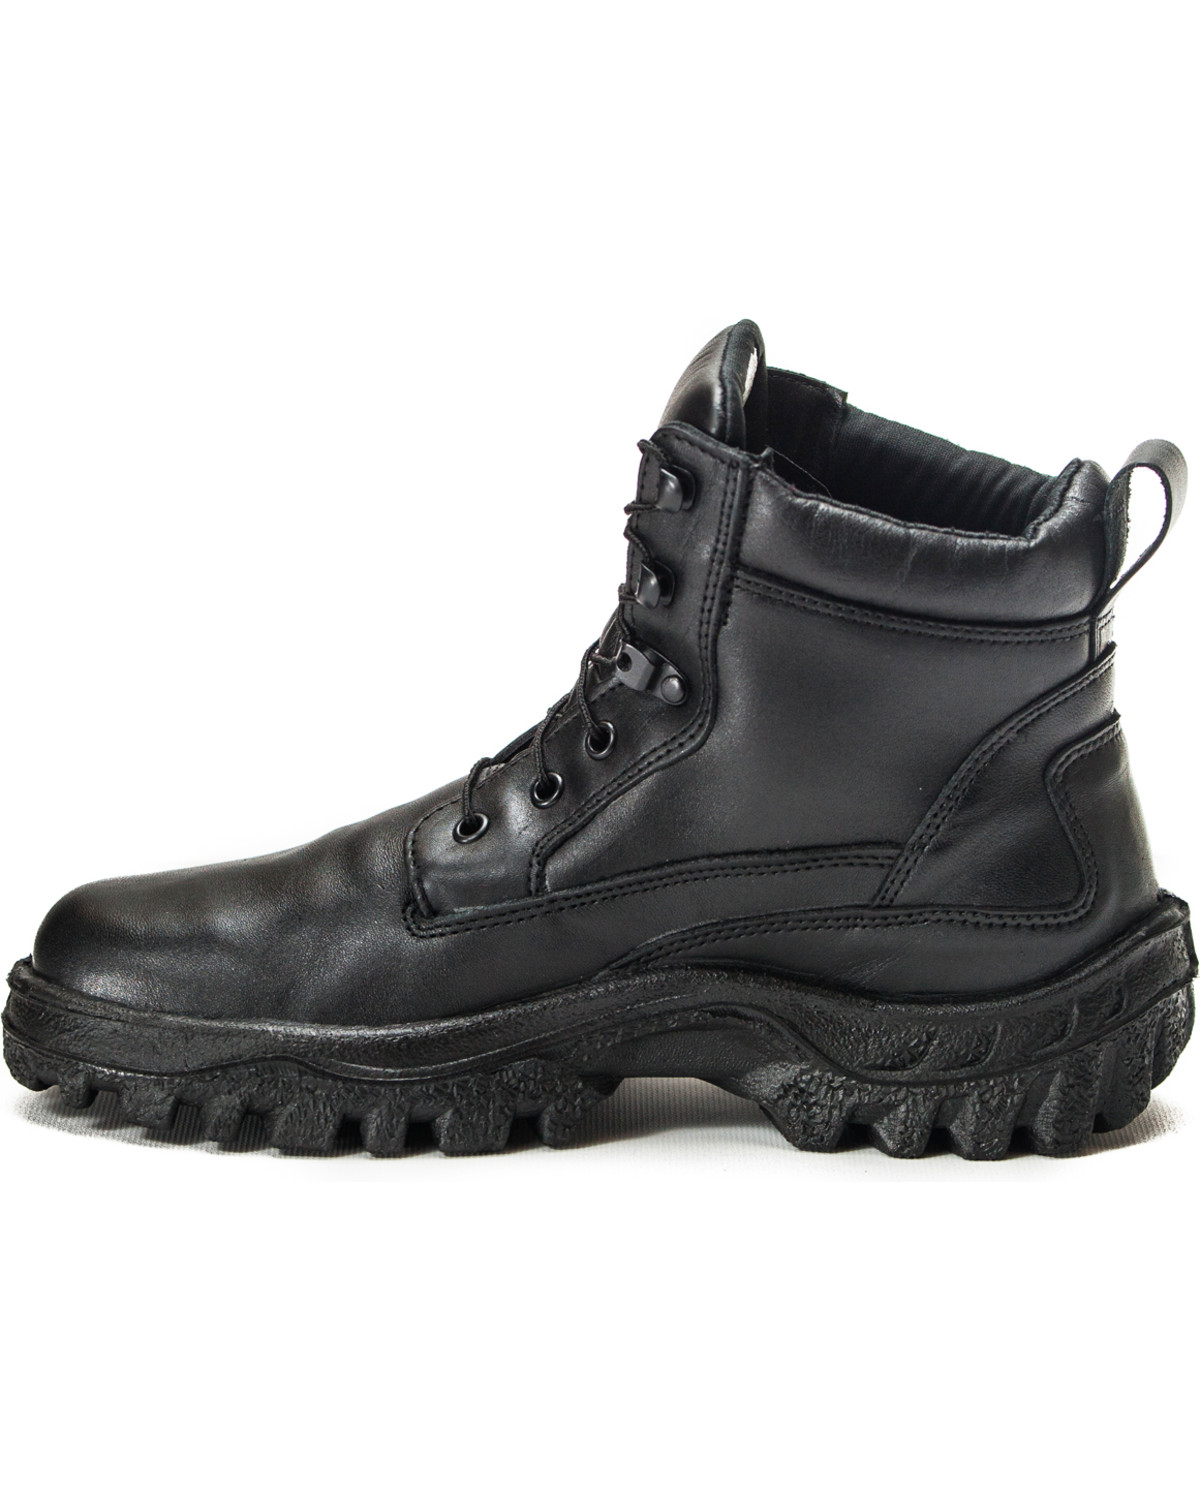 Rocky Men's TMC Postal Approved Duty Boots | Boot Barn